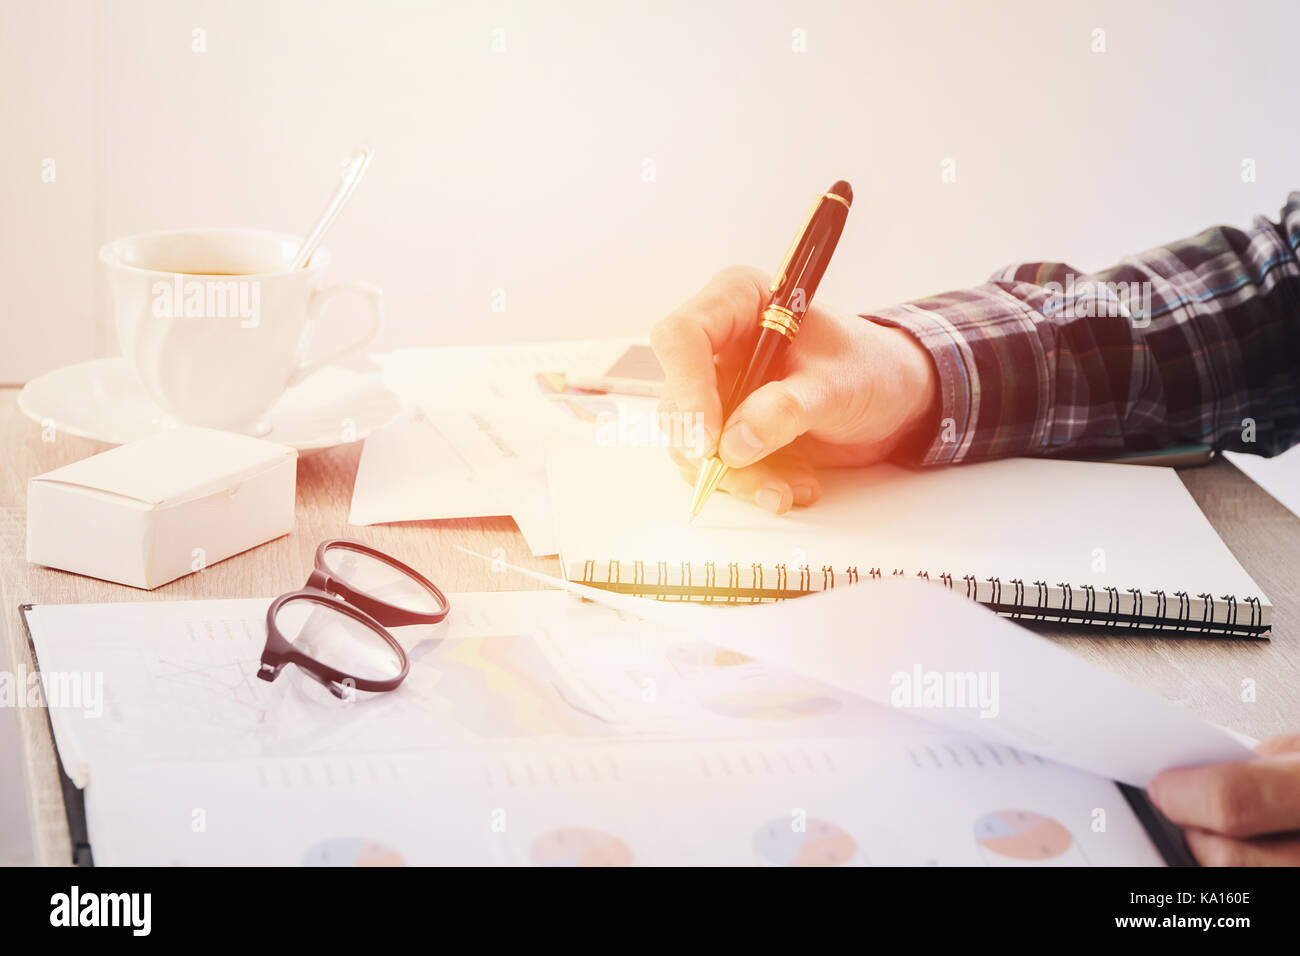 Hands of businessman writing something on notebook paper, and business finance report document blurred on table. Stock Photo